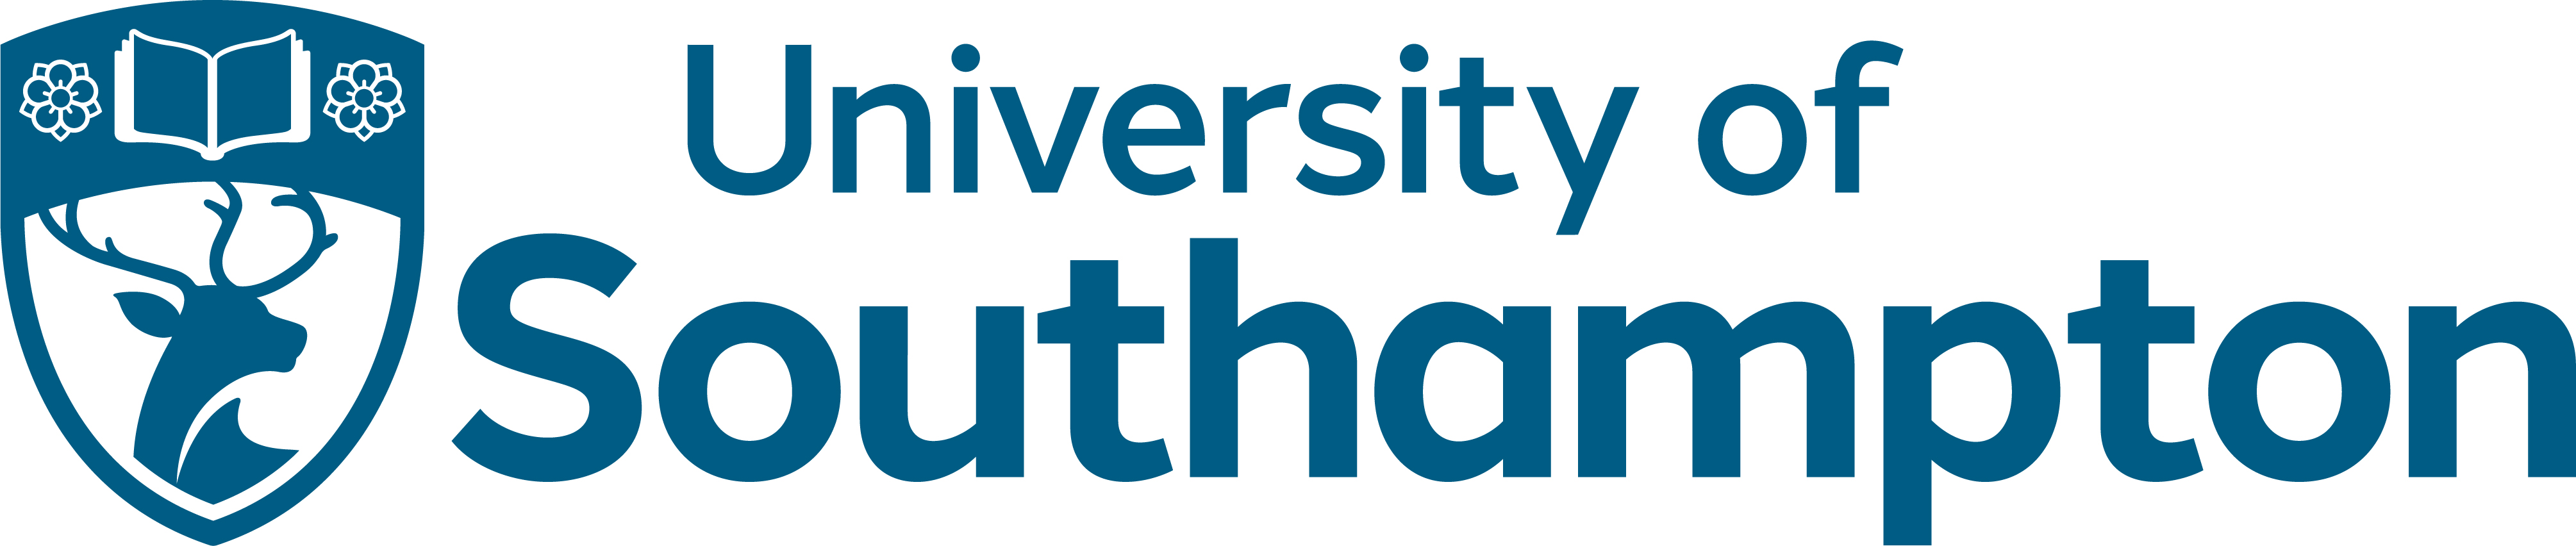 University of Southampton logo in turquoise on a white background featuring an emblem with a stag head